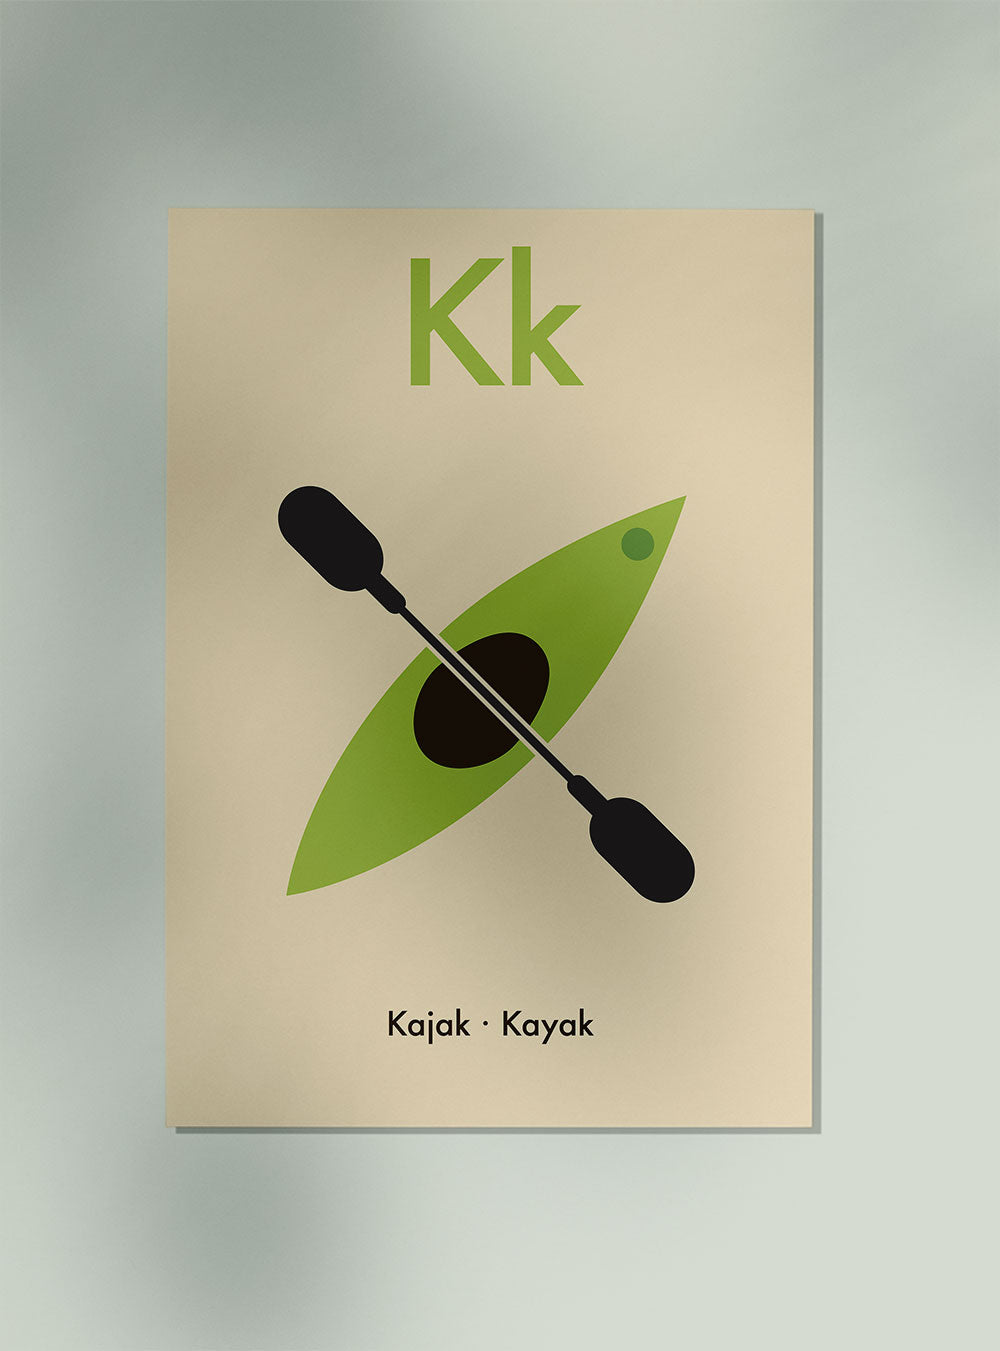 K for Kayak - Children's Alphabet Poster in German and English